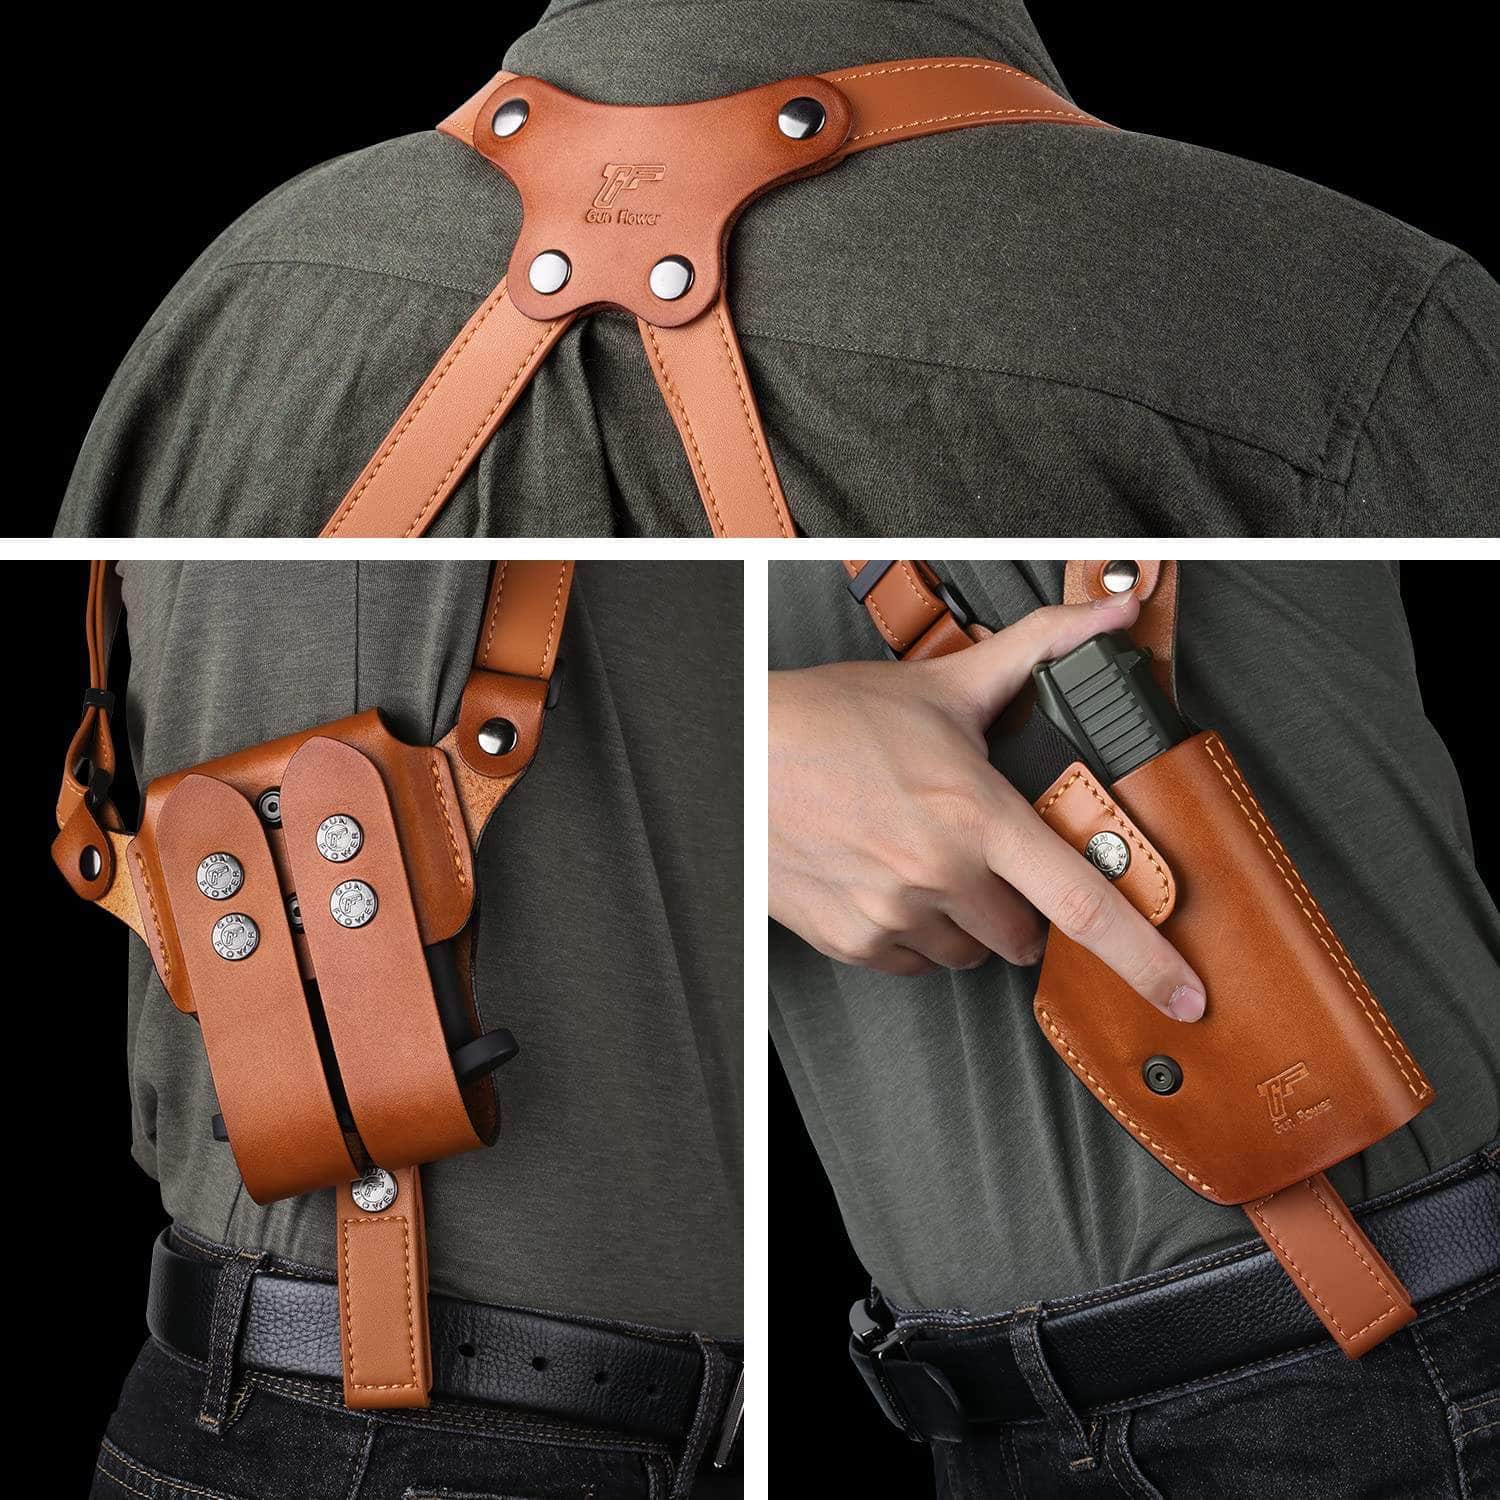 Saddle Mate Leather Gun Holster with Adjustable Retention Strap - Brown - 6 in